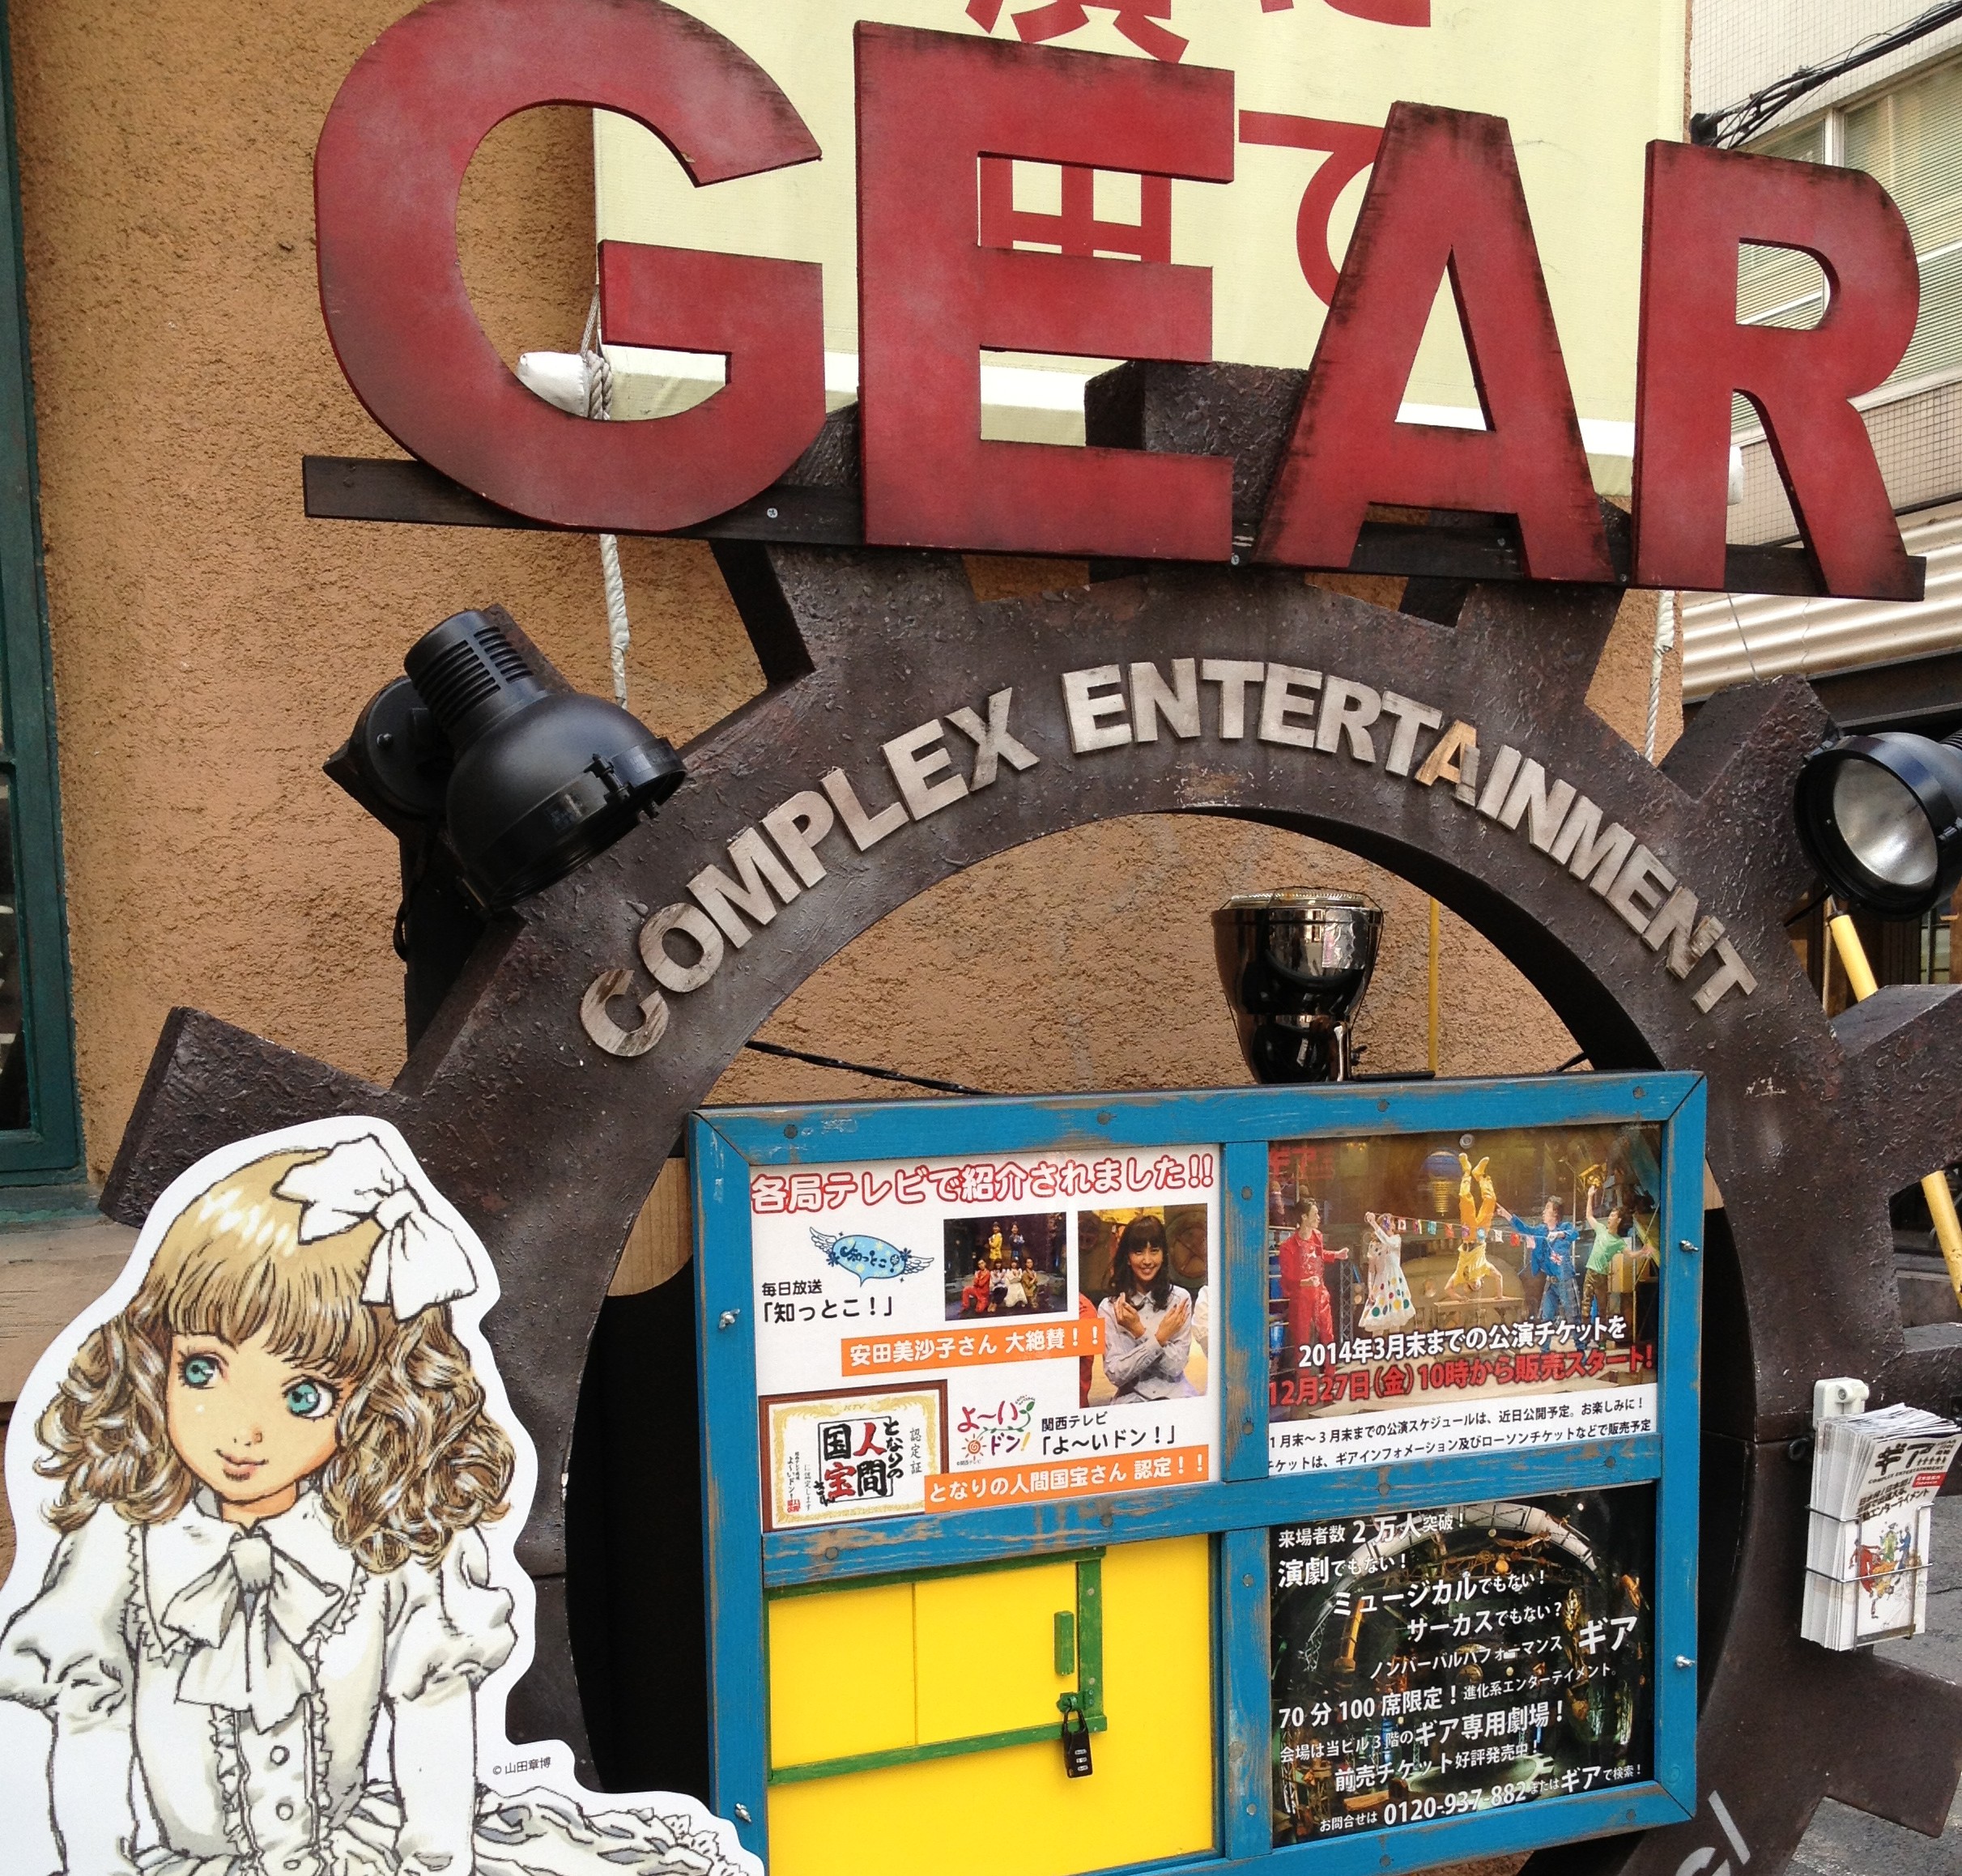 Show Review: Gear